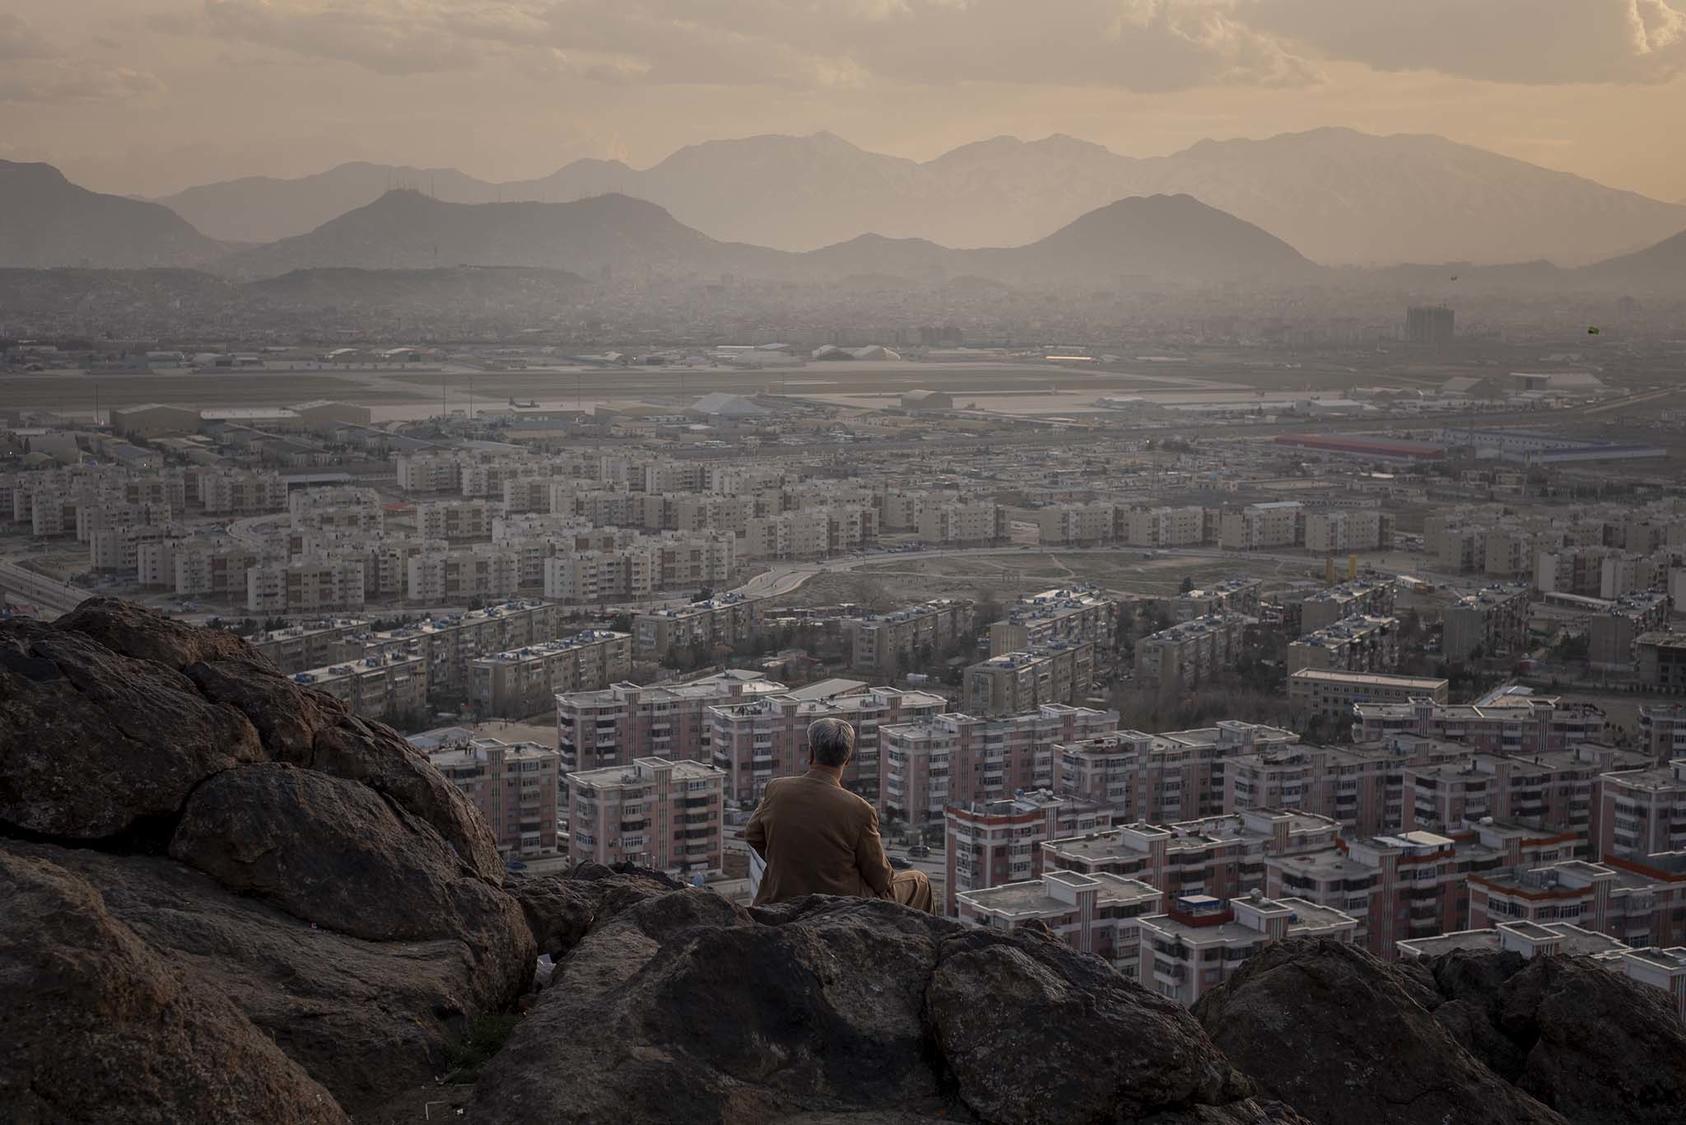 A view from the northern outskirts of Kabul, Afghanistan, March 18, 2020. (Jim Huylebroek/The New York Times)